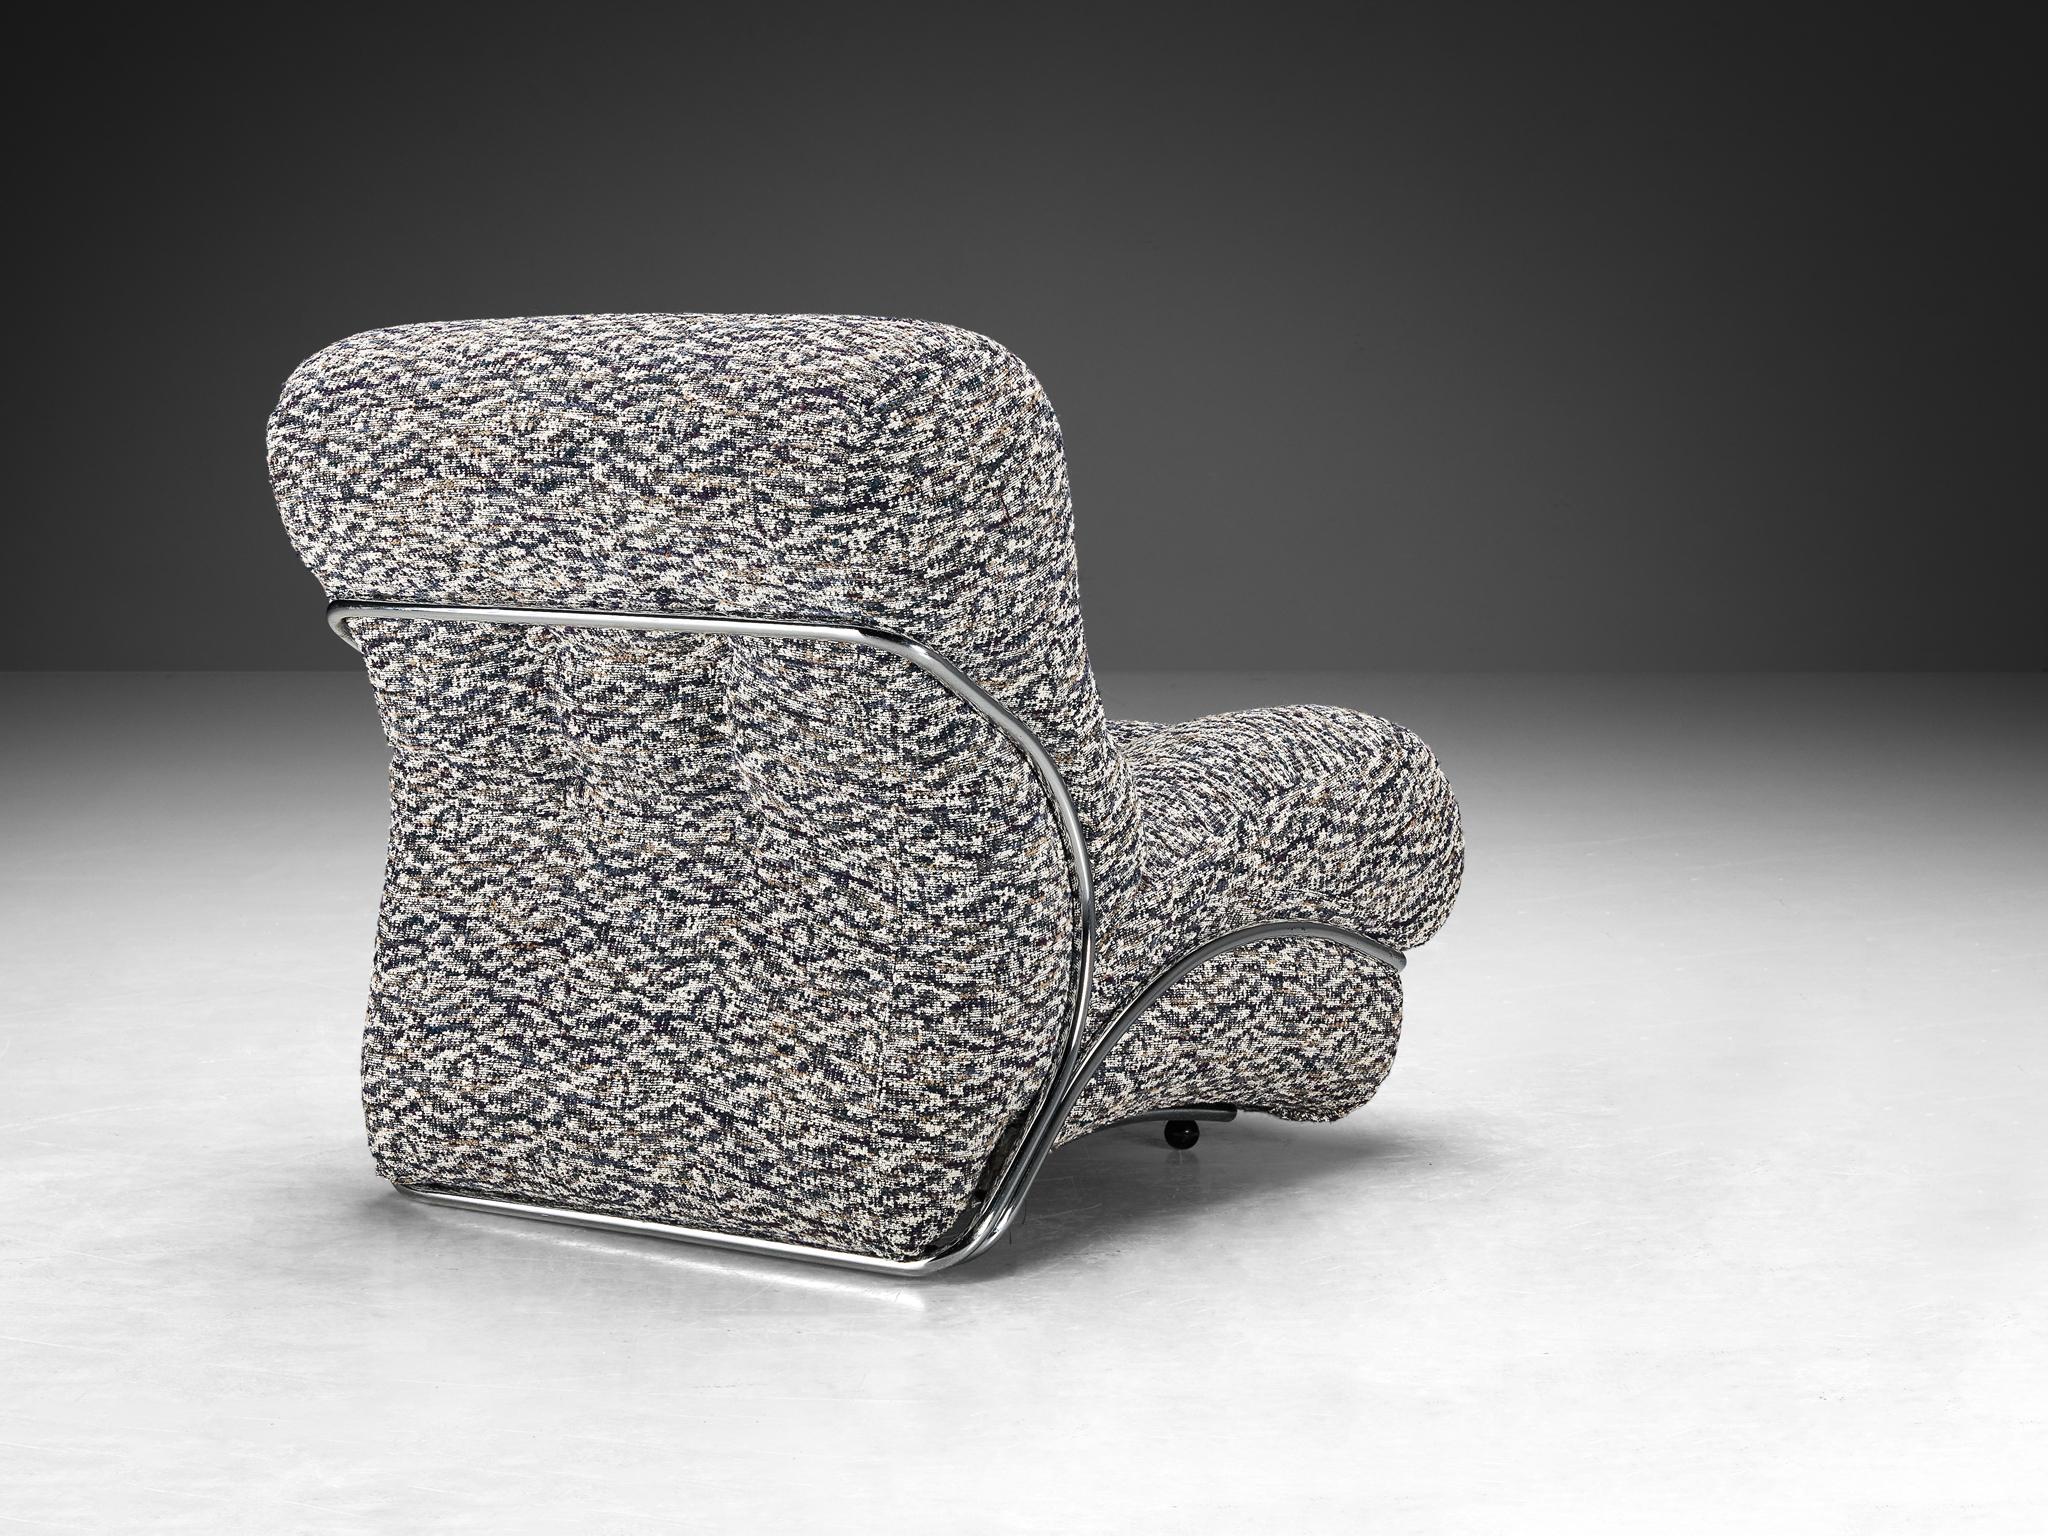 Late 20th Century I.P.E. Pair of 'Corolla' Lounge Chairs in Patterned Upholstery  For Sale